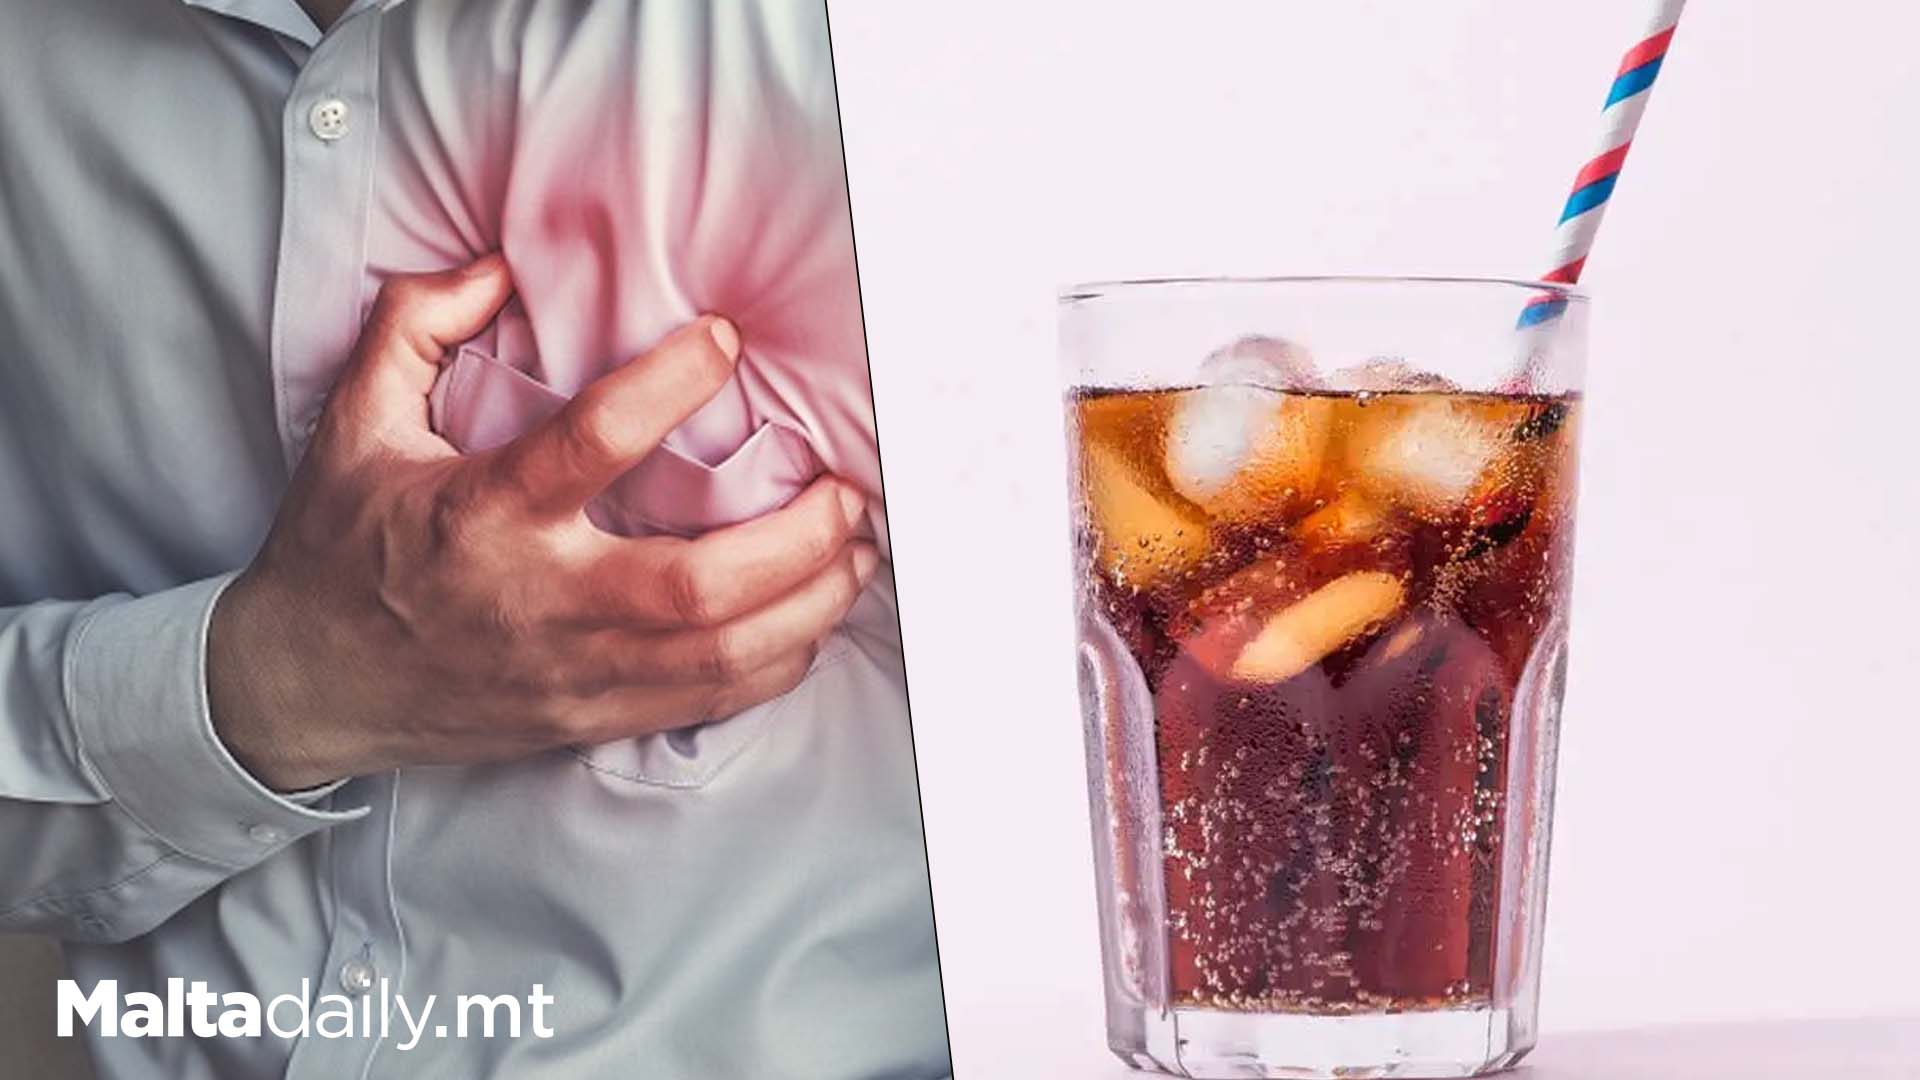 Diet Drinks May Increase Risk Of Heart Conditions By 20%